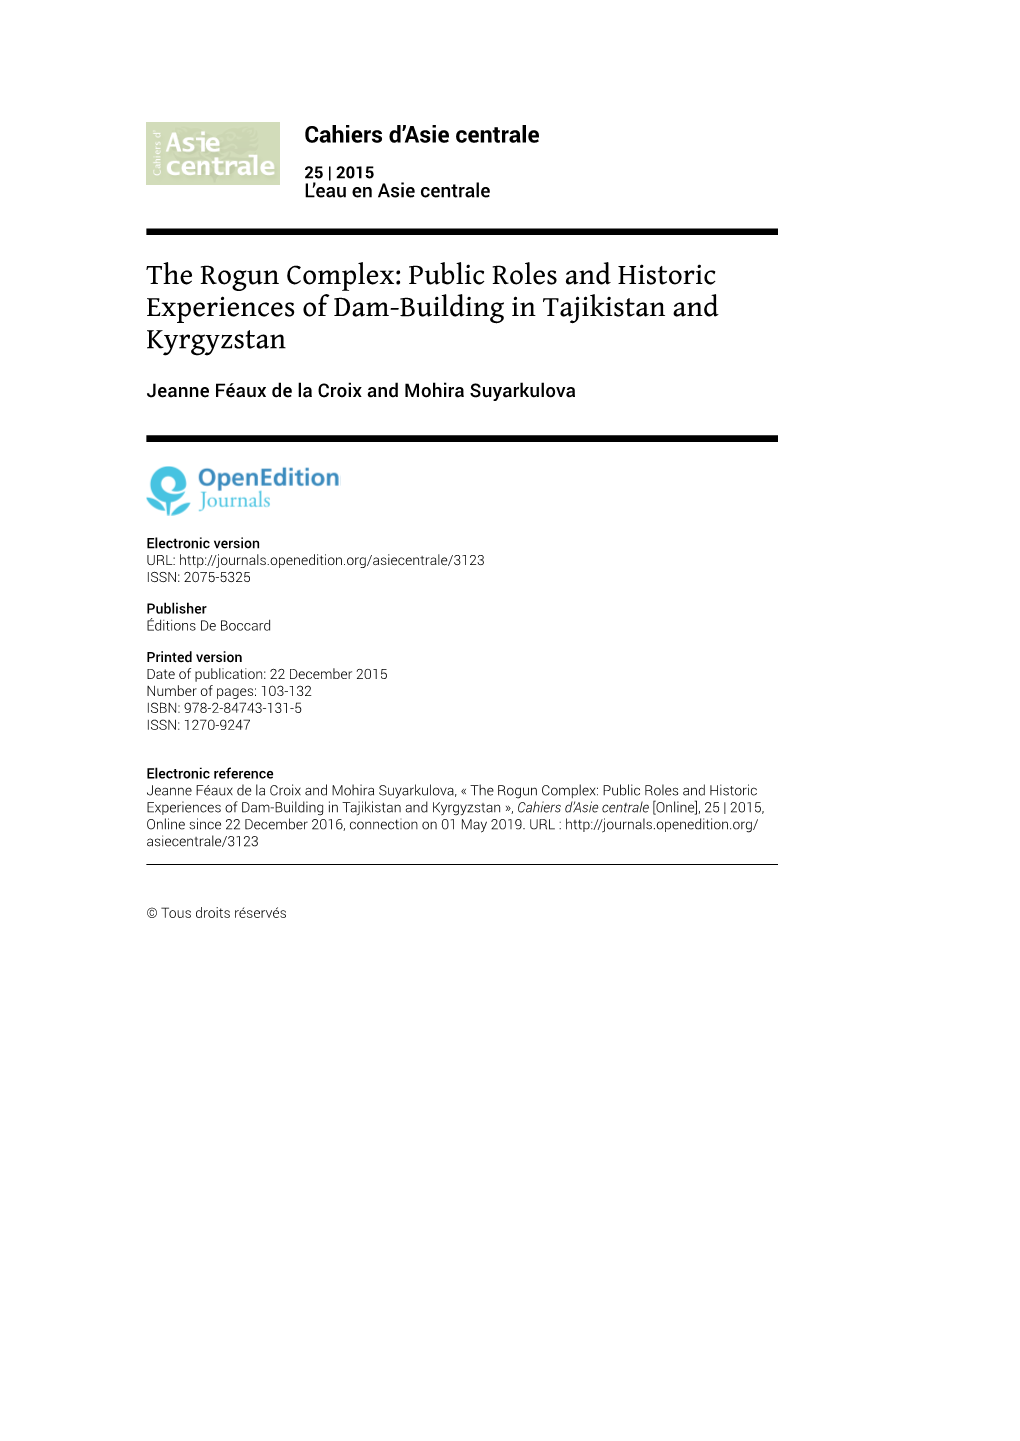 The Rogun Complex: Public Roles and Historic Experiences of Dam-Building in Tajikistan and Kyrgyzstan